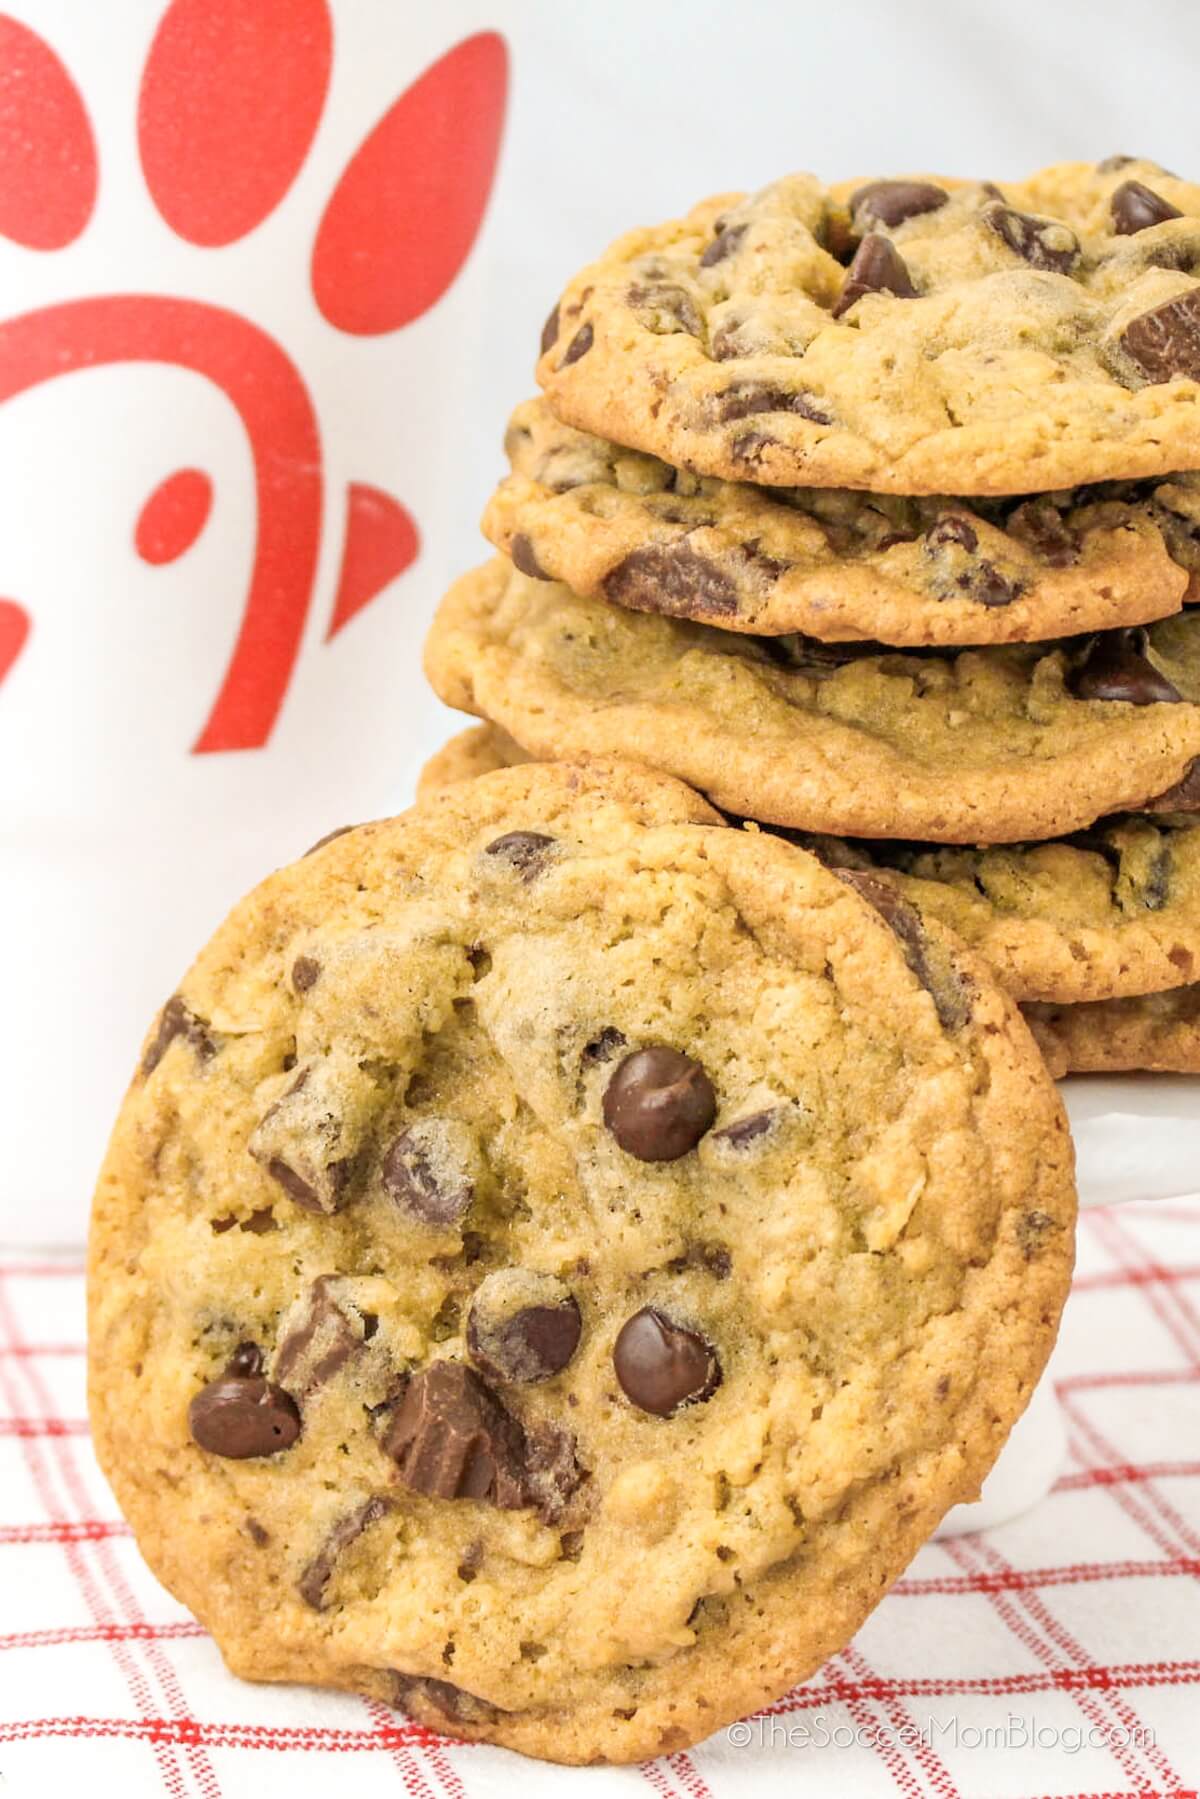 Chick-fil-a cookies, stacked in front of cup